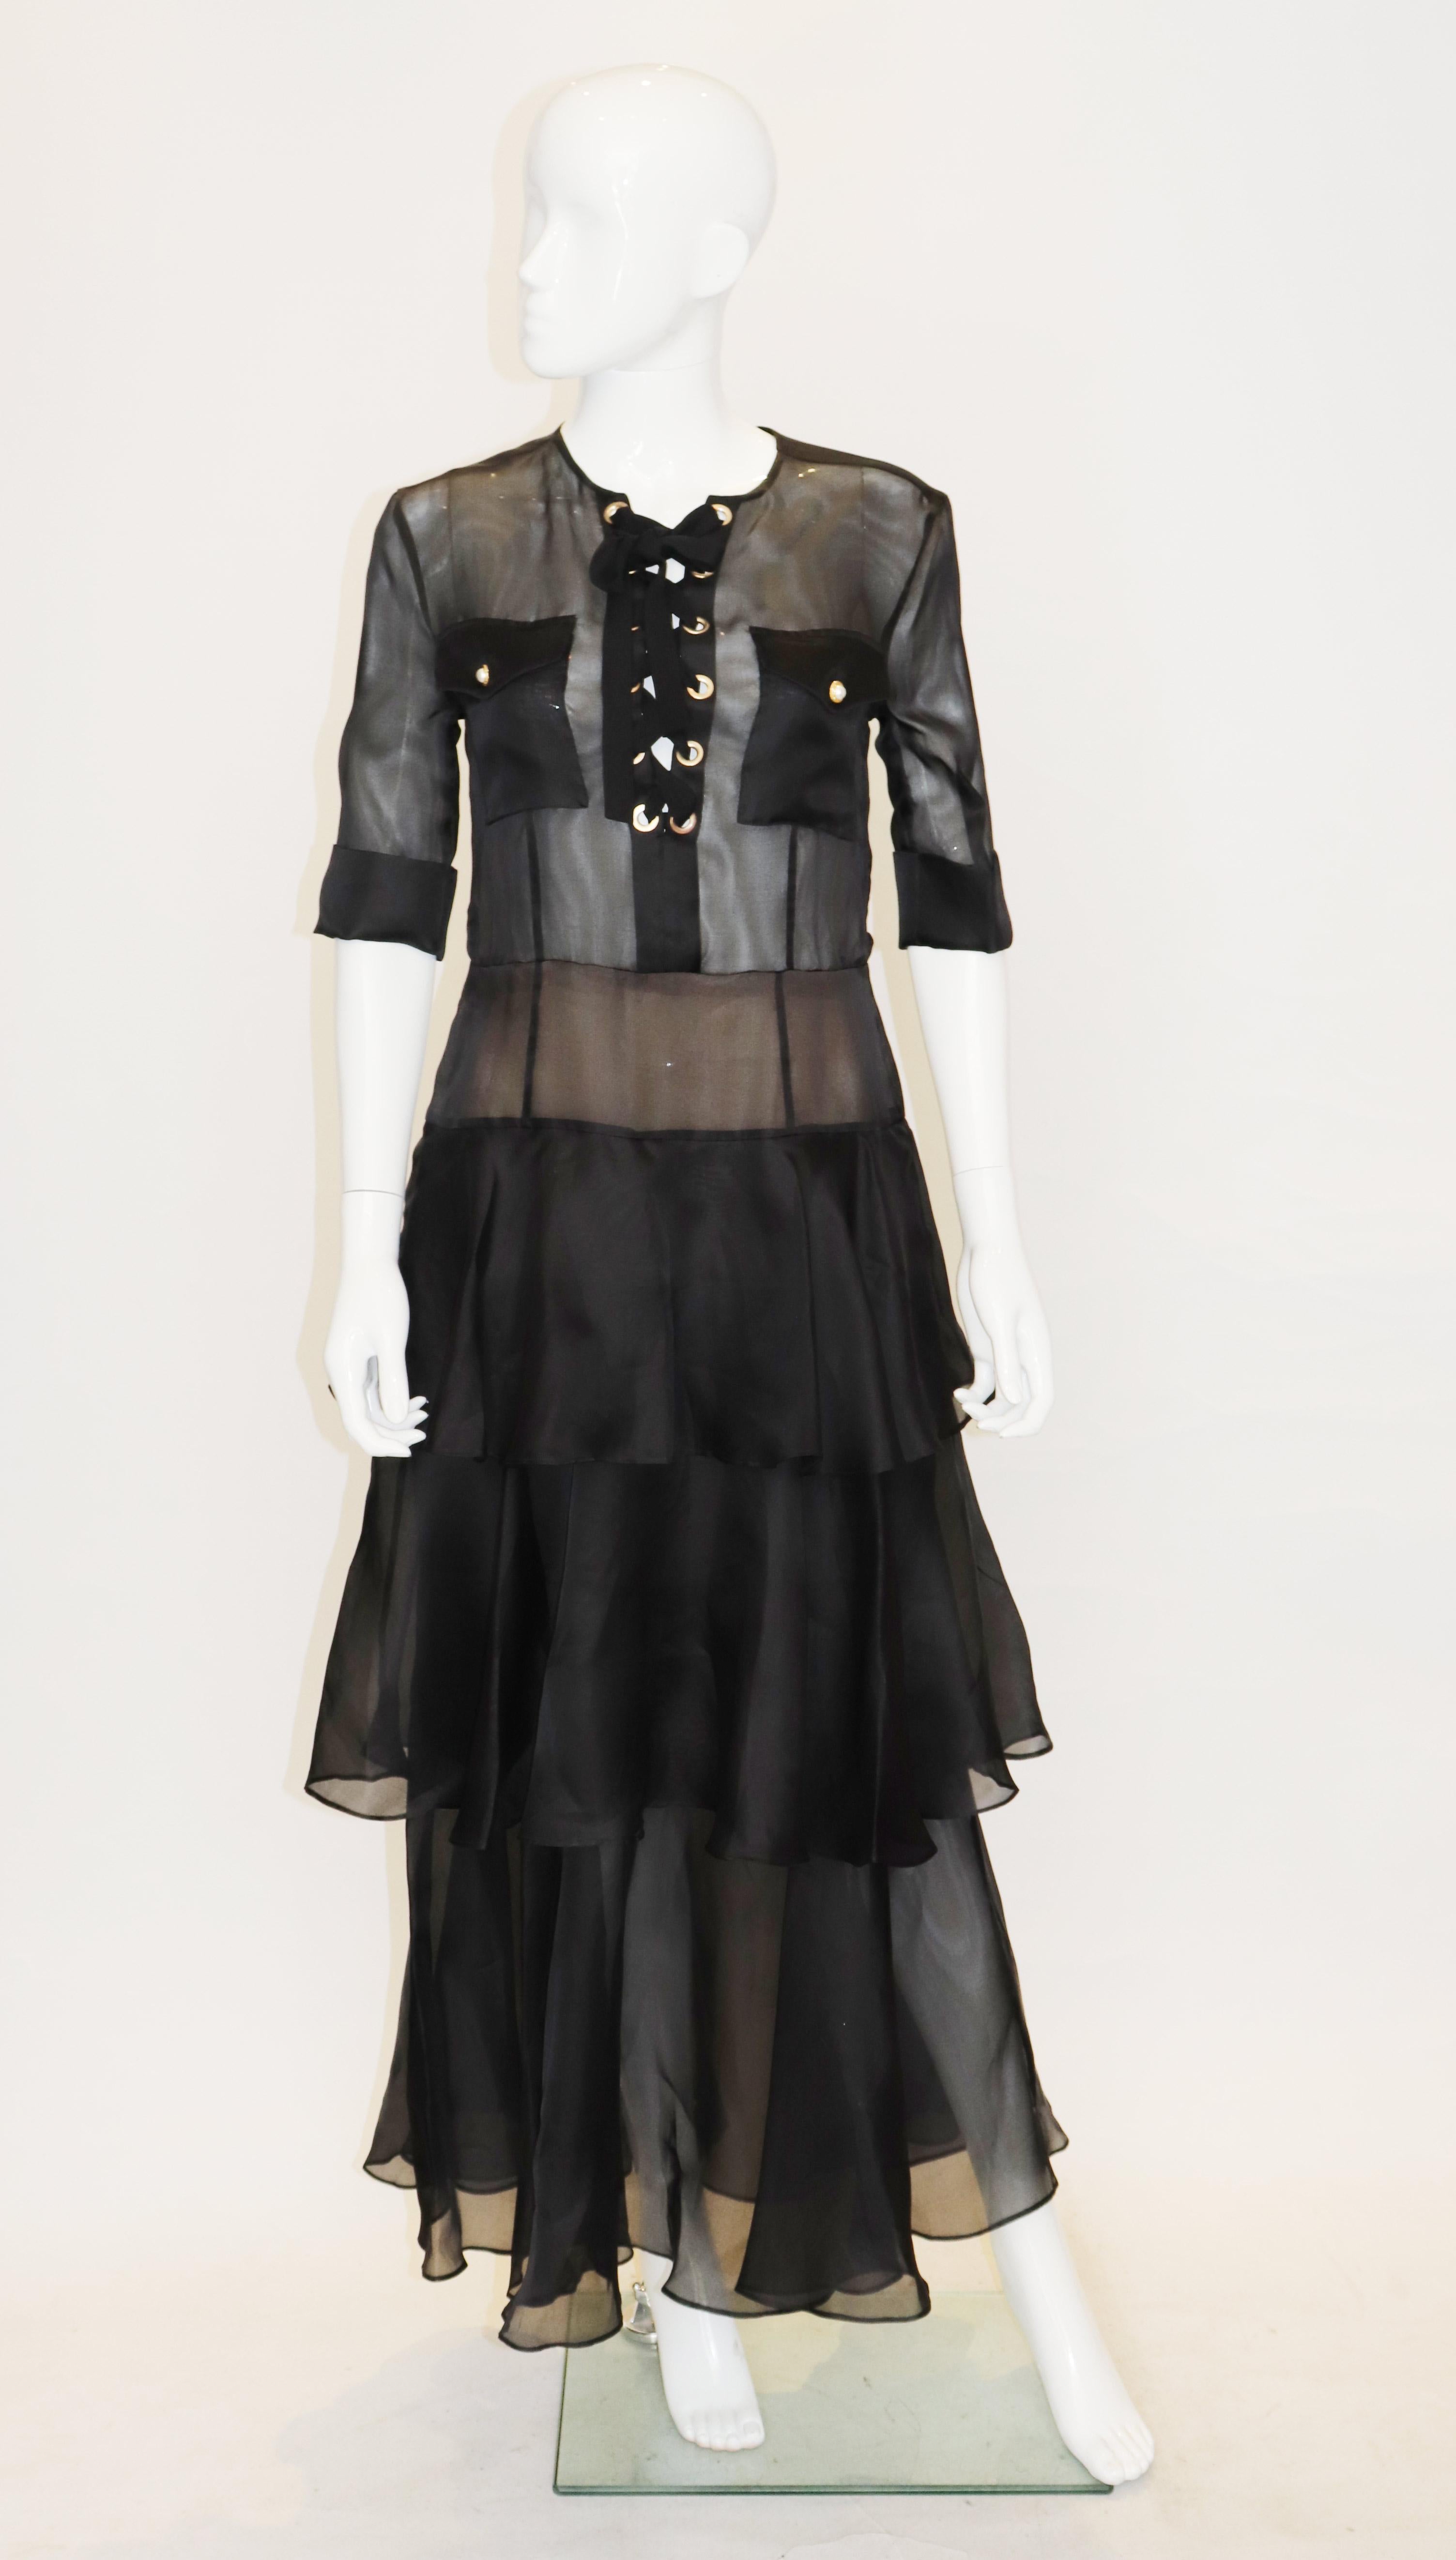 A head turning and chic gown in black silk by Alessandra Rich. The gown is collarless and has two breast pockets , short sleeves with turn up cuffs and a central back zip. It has a tiered skirt.